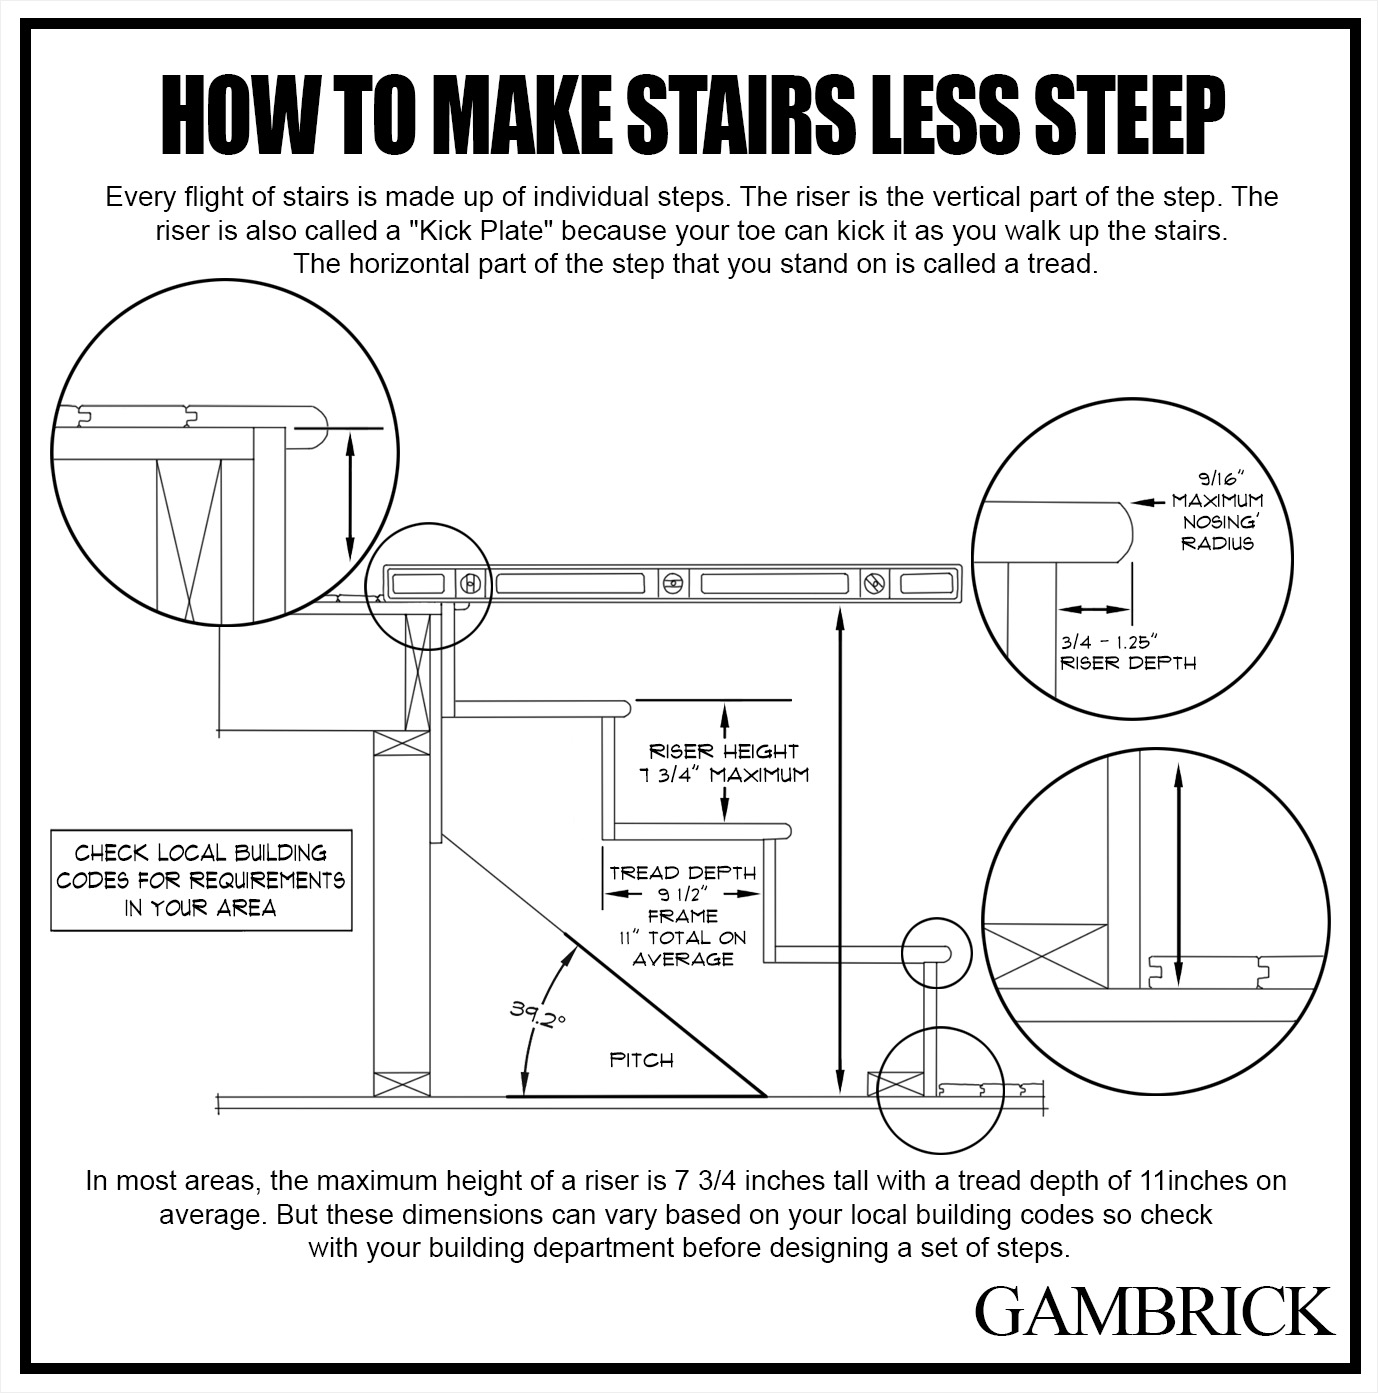 how to make stairs less steep infographic chart 1.1